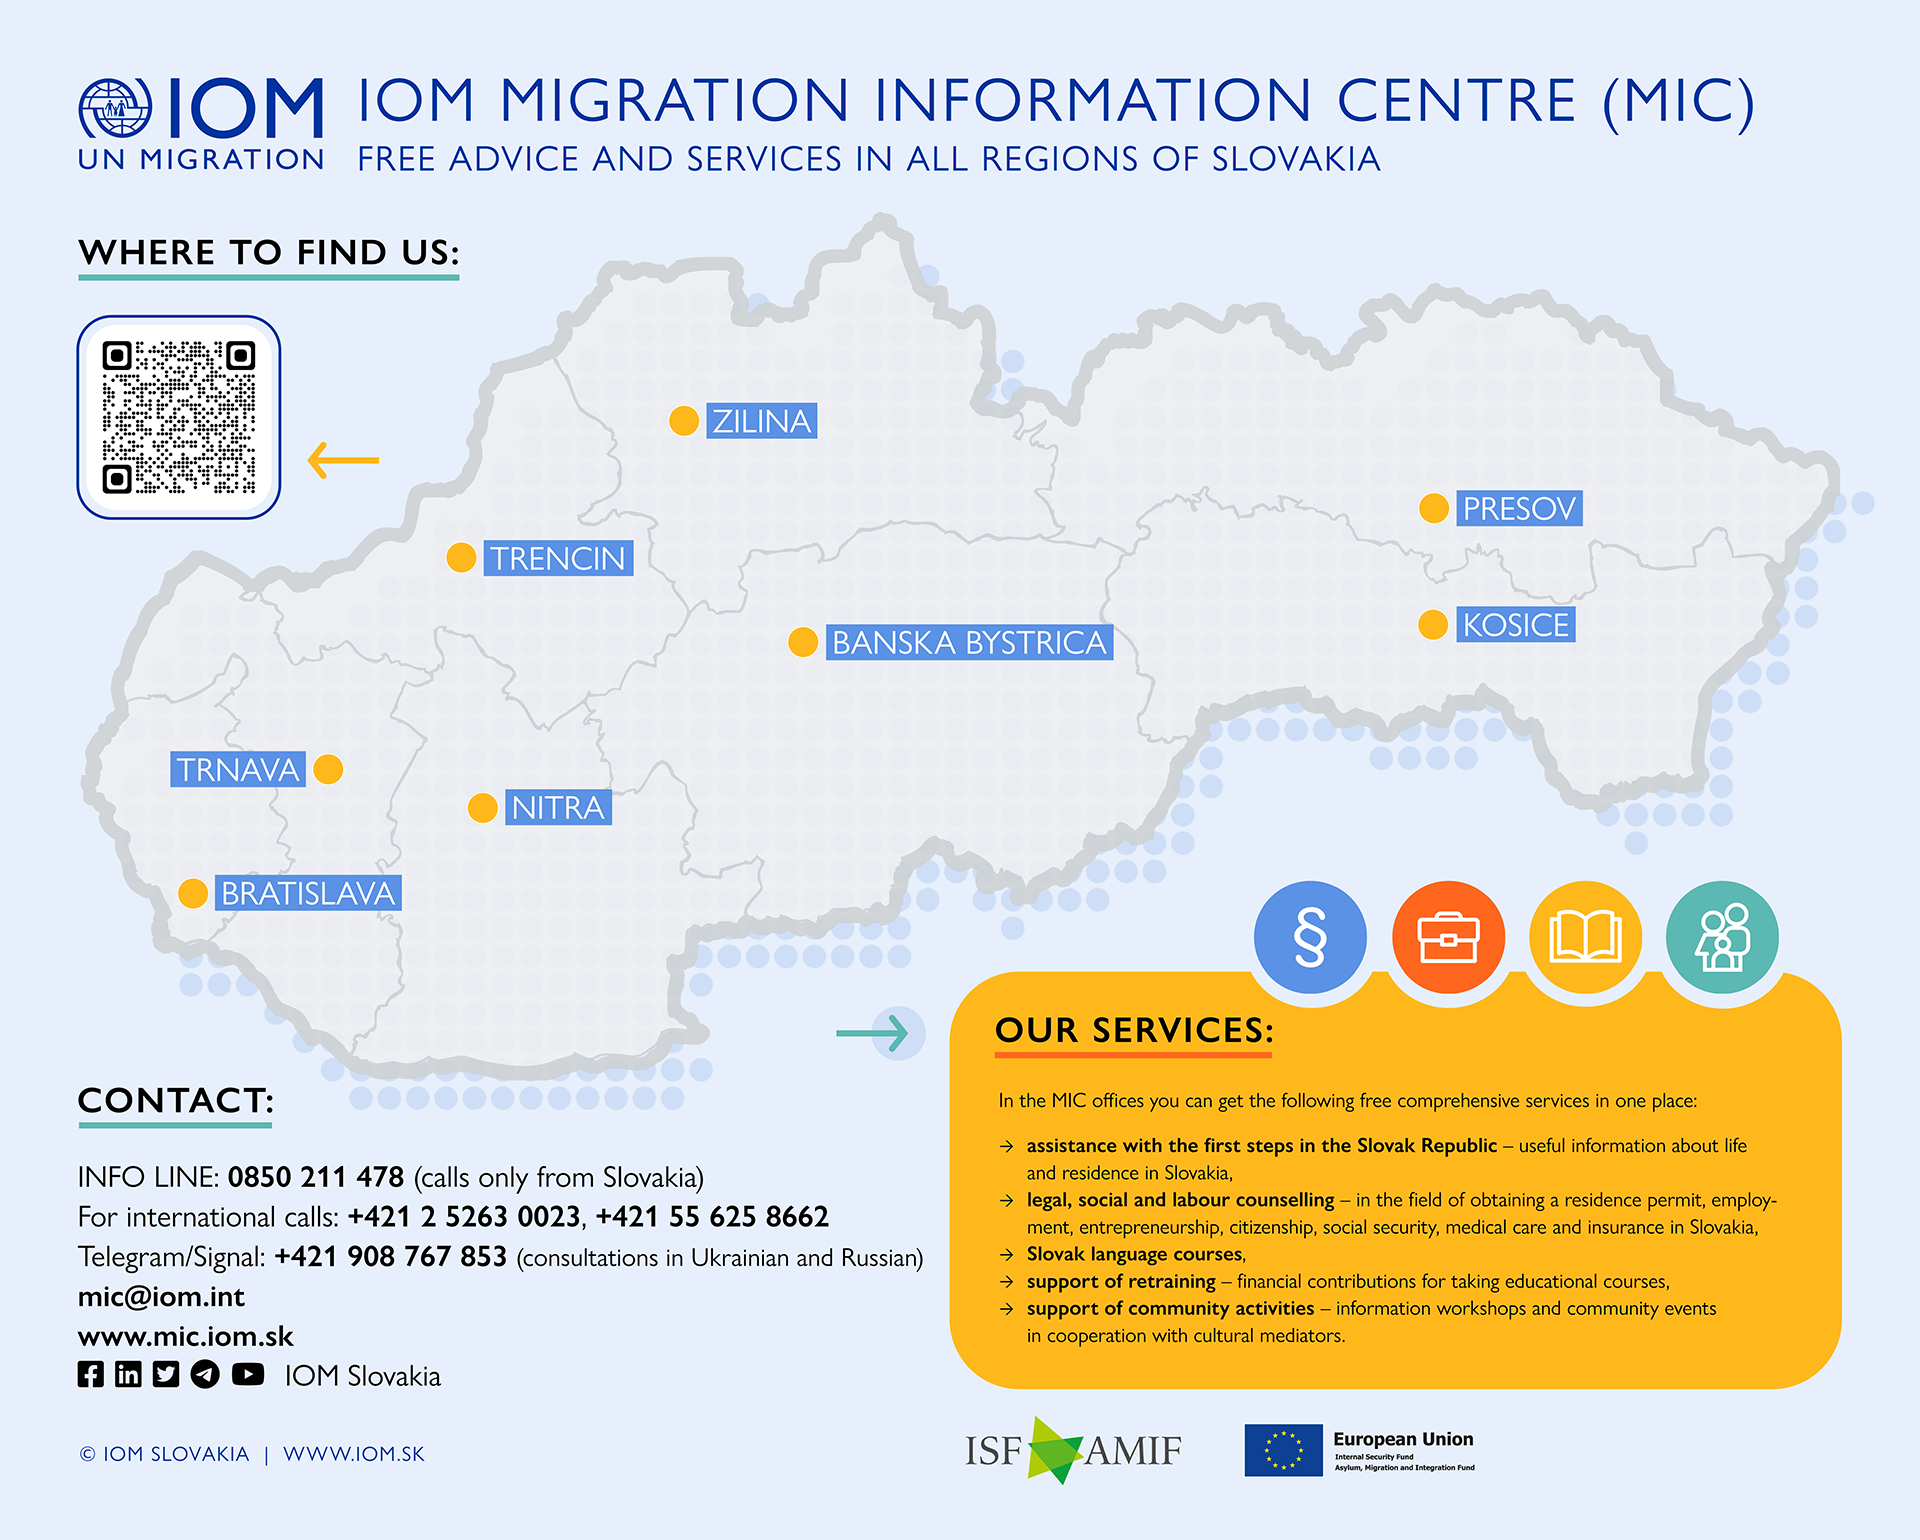 Map of regional centres of the IOM Migration information centre